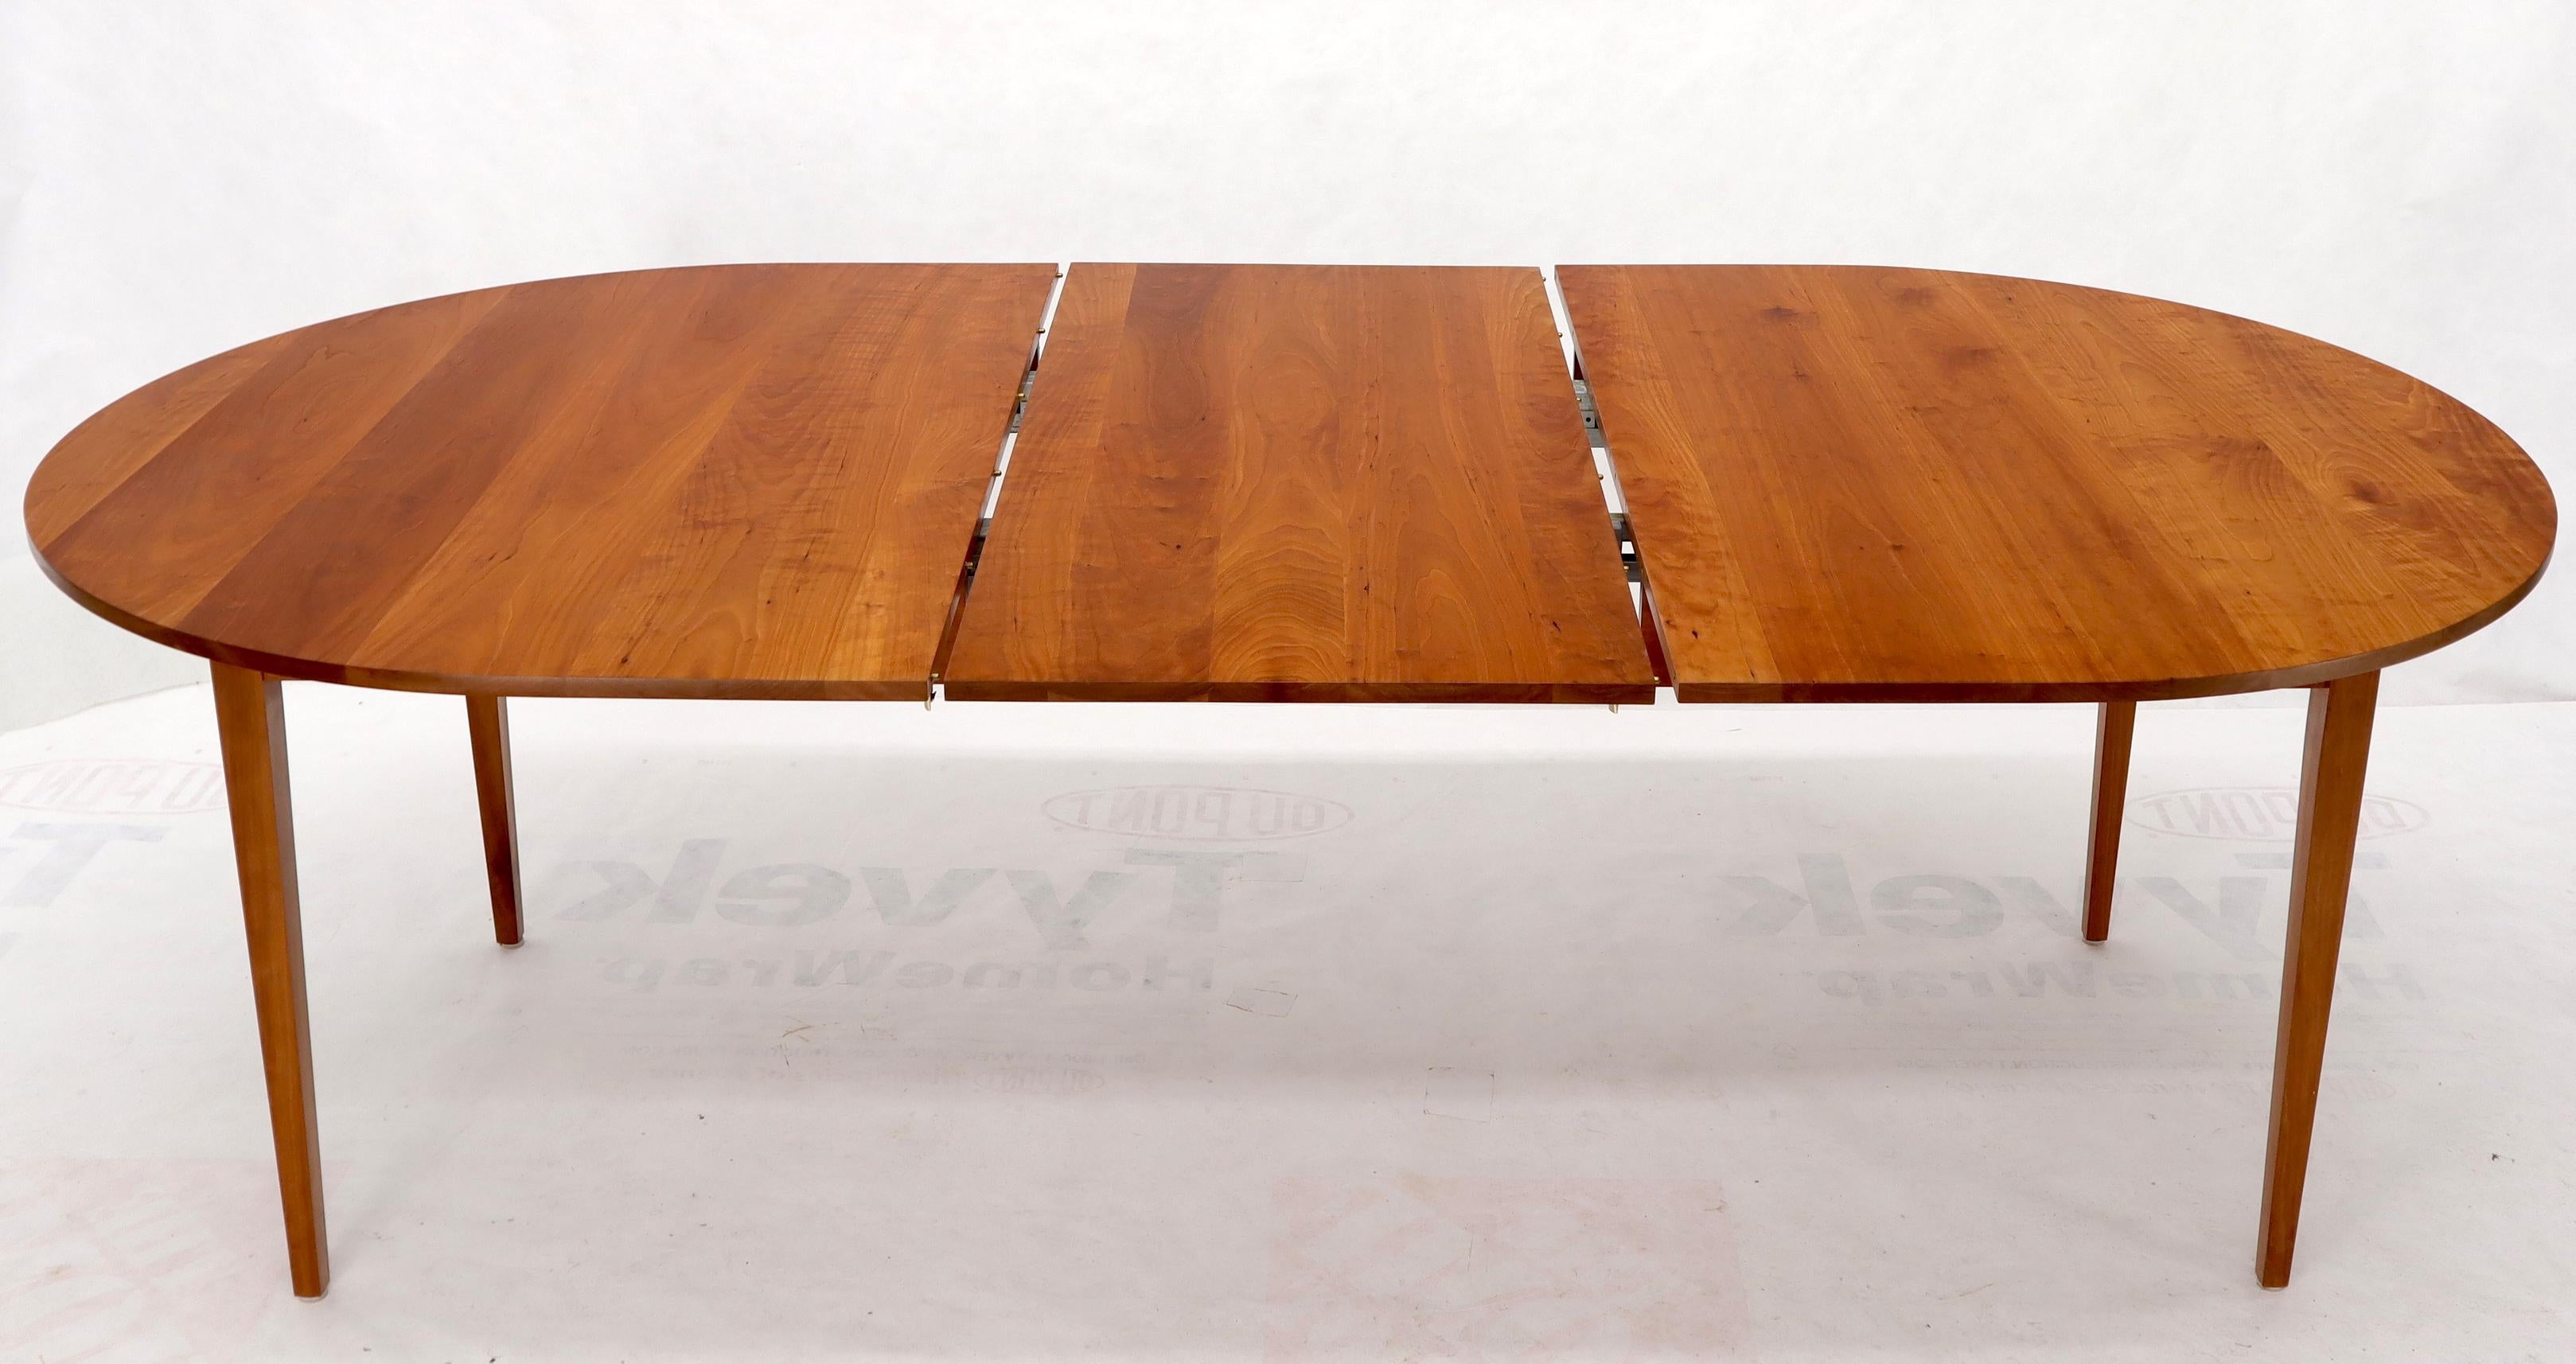 American Thomas Moser Signed Oval Solid Cherry Dining Table with One Leaf